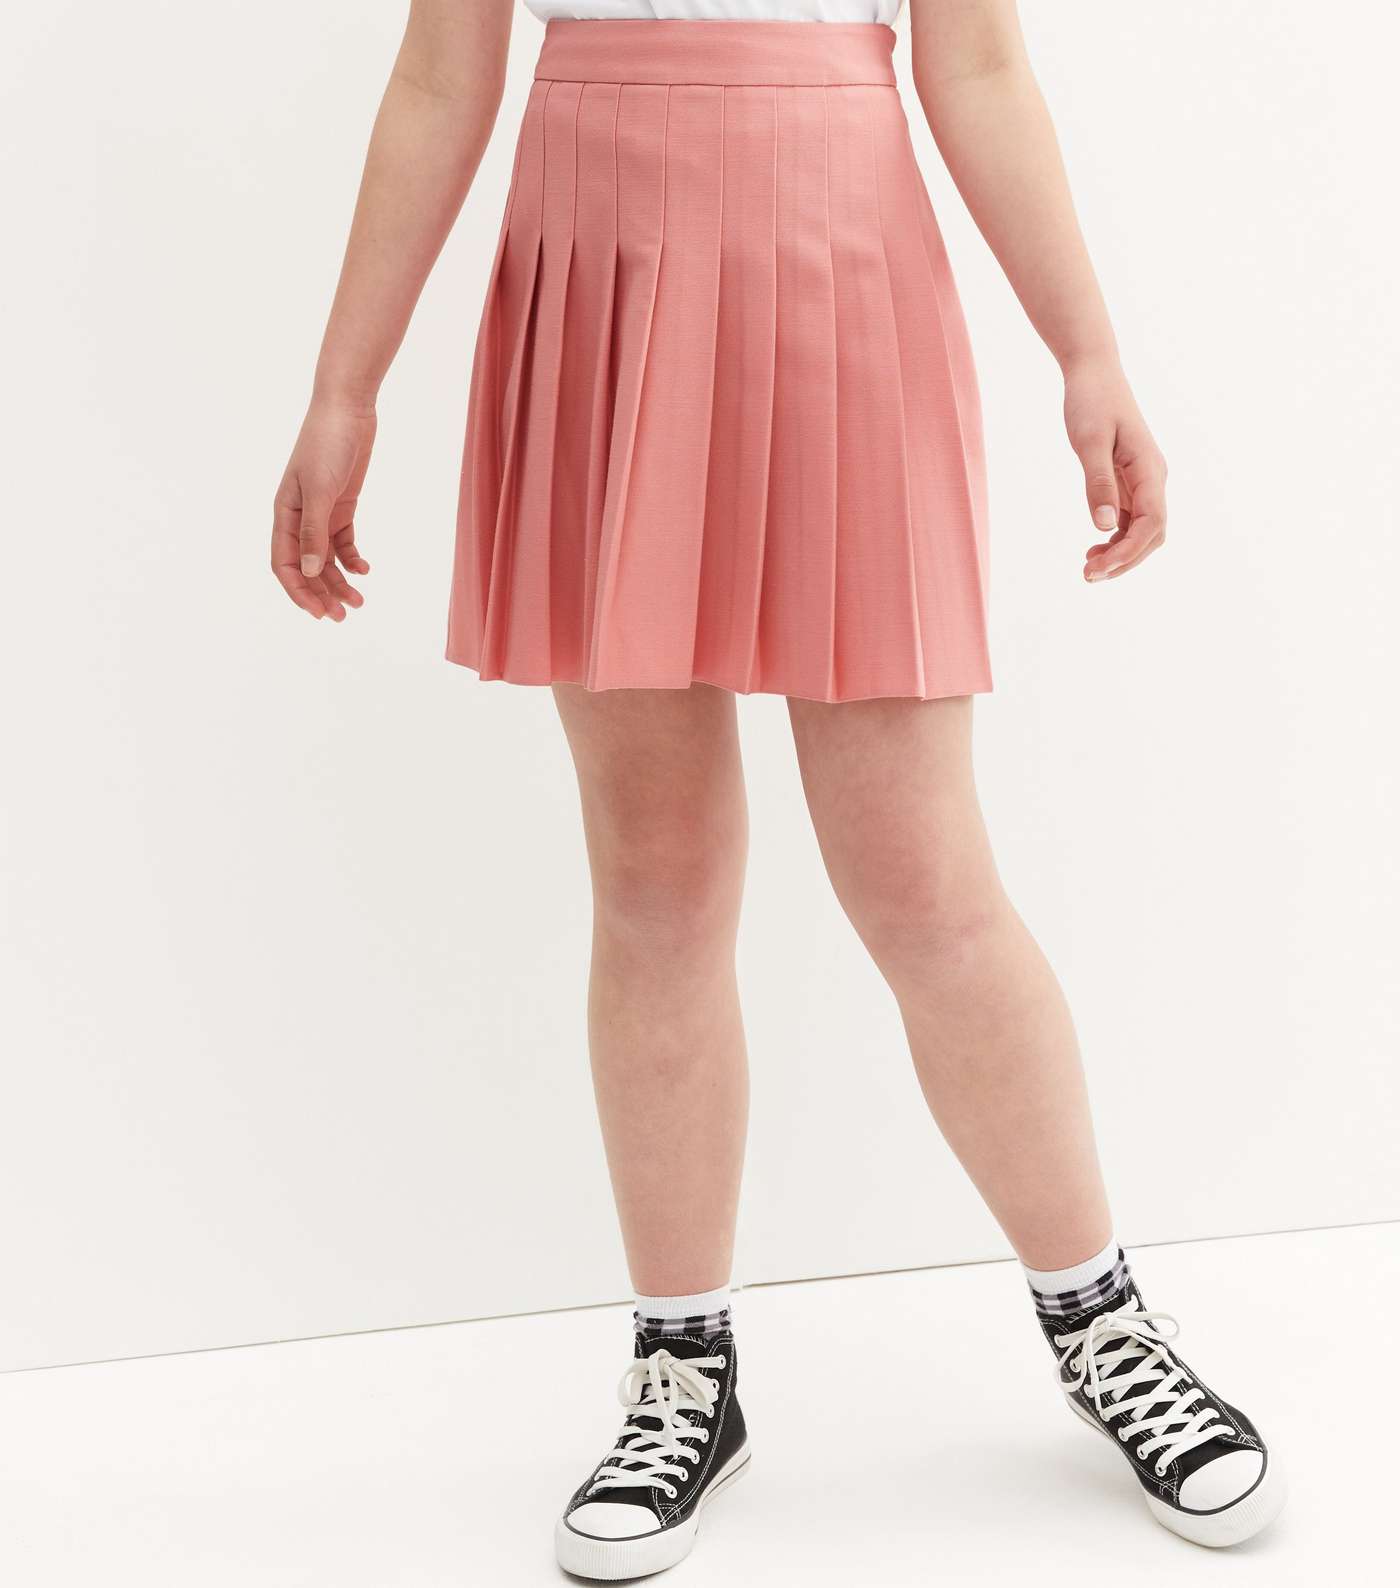 Girls Pale Pink Pleated Tennis Skirt Image 2